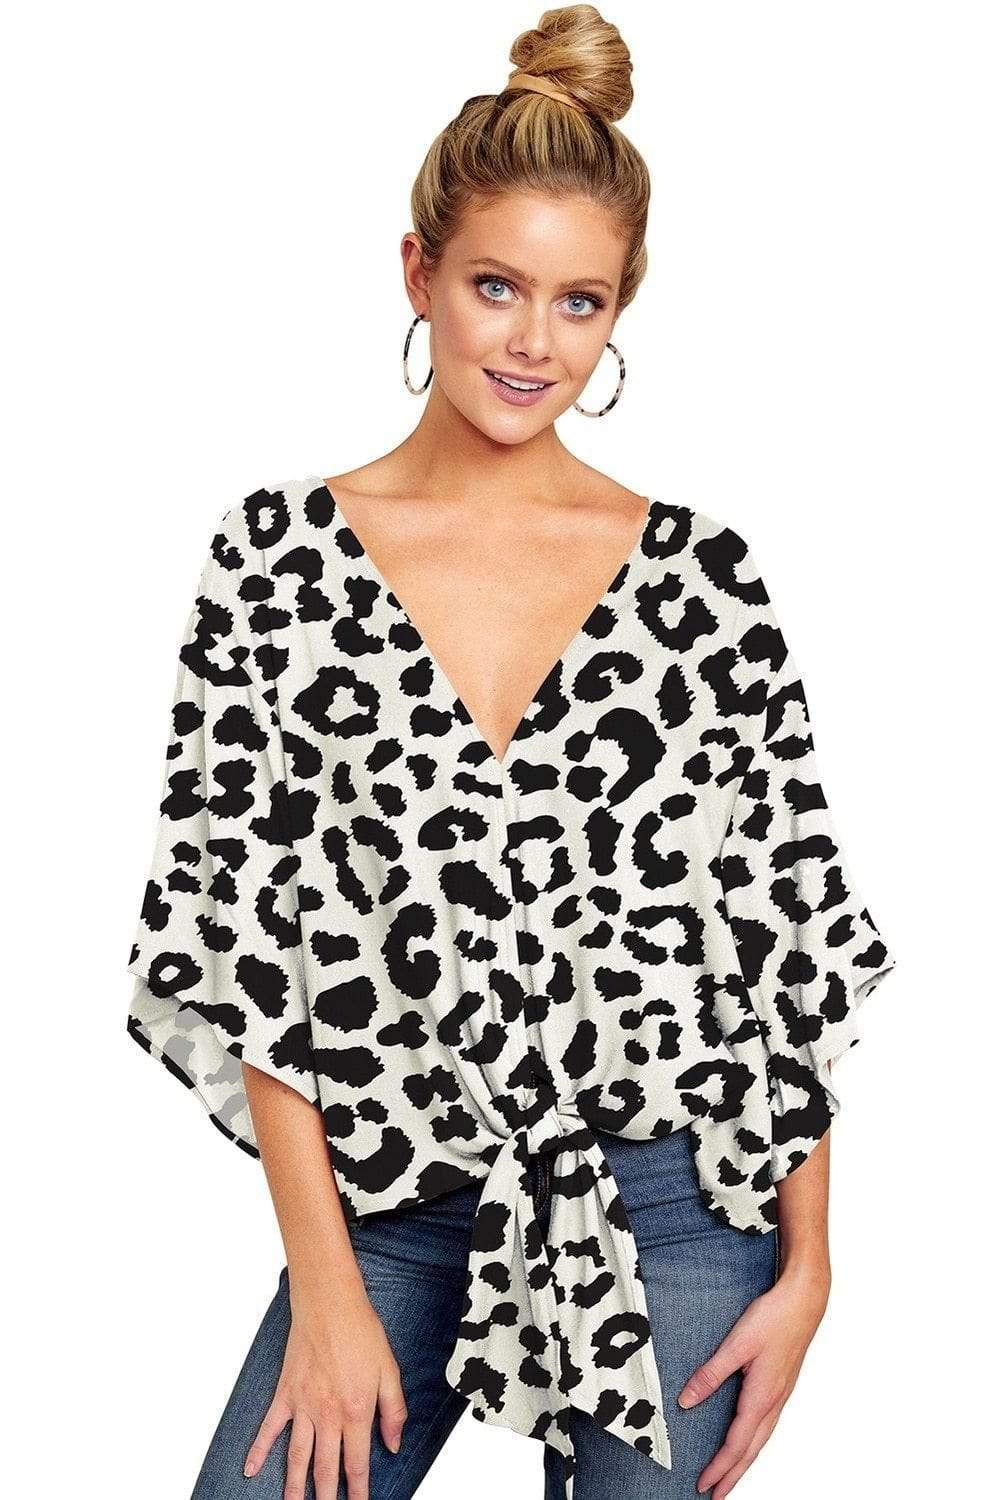 Fashion Knotted Blouse For Women - For Women USA